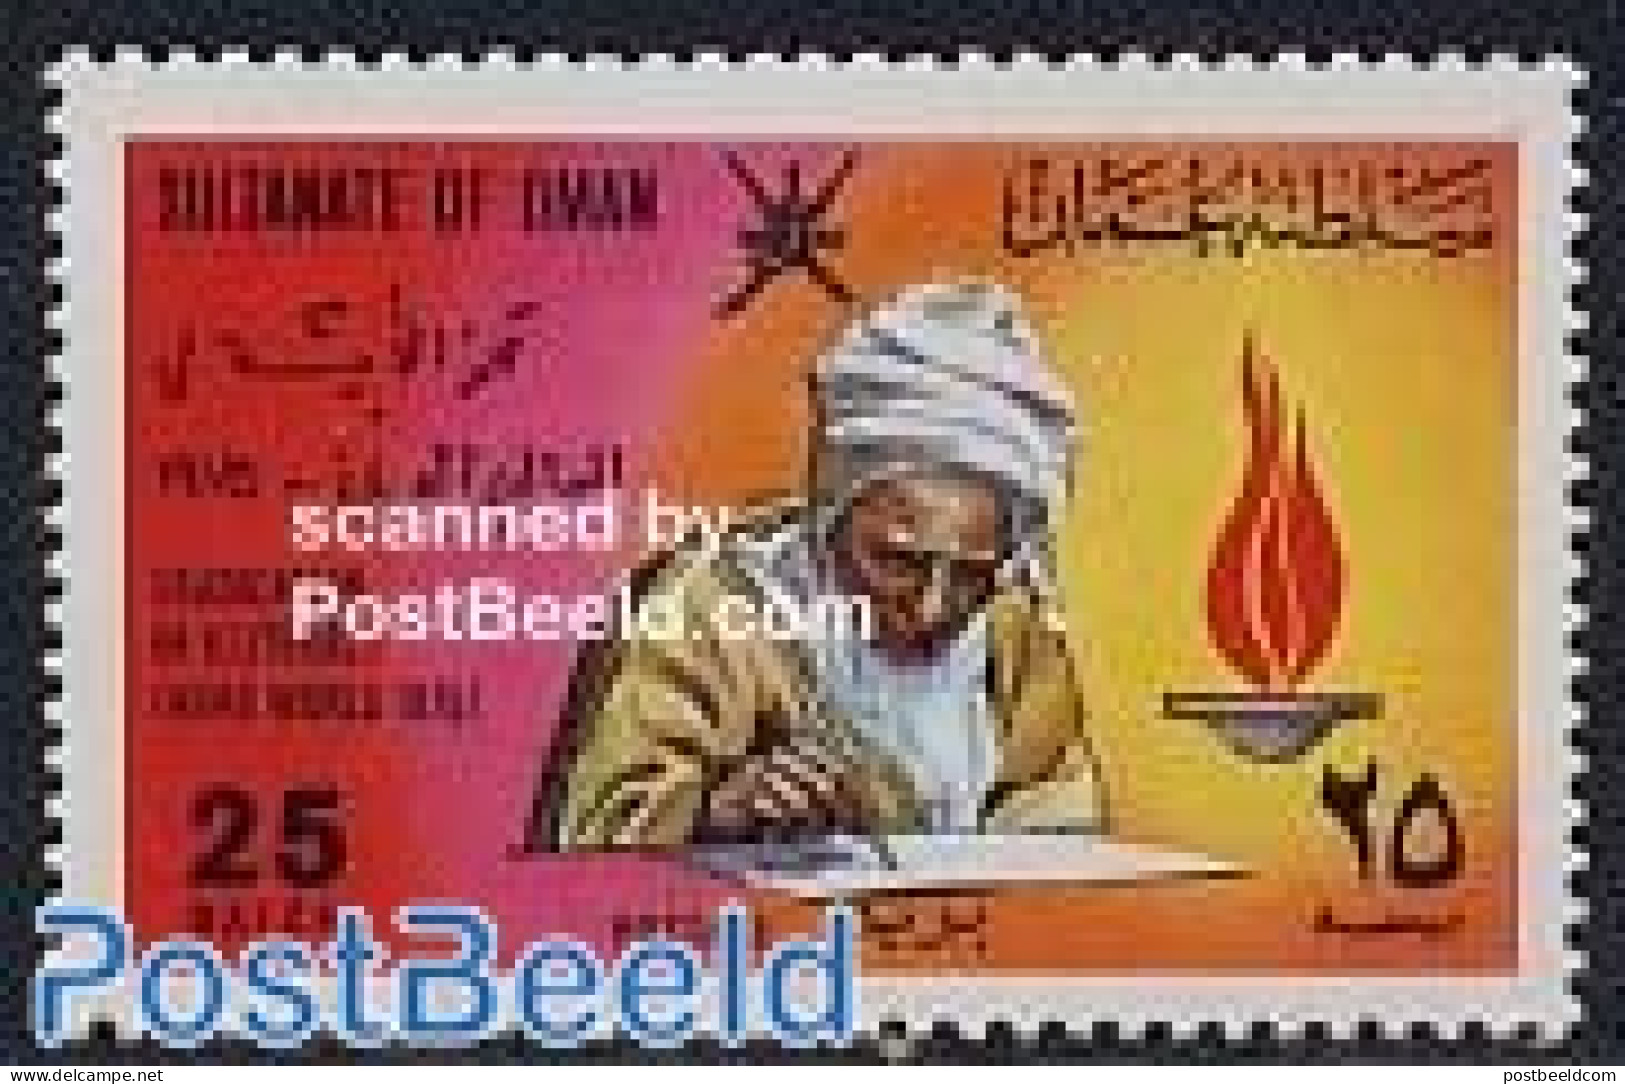 Oman 1975 Reading Campaign 1v, Mint NH, Science - Education - Omán